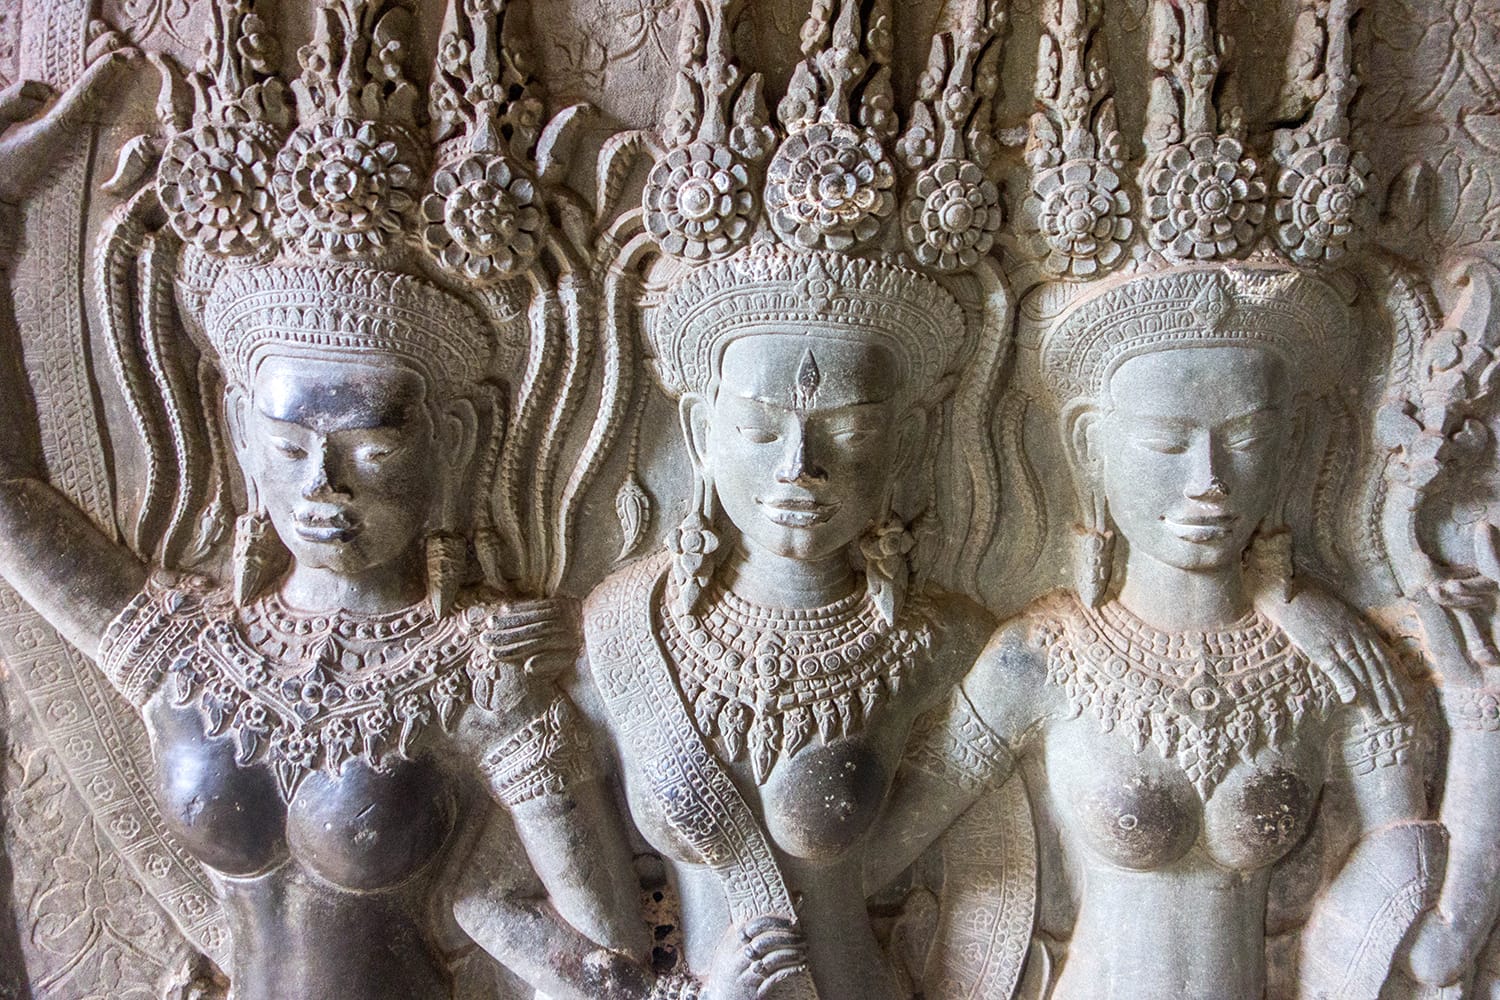 Relief at Angkor Wat in Cambodia